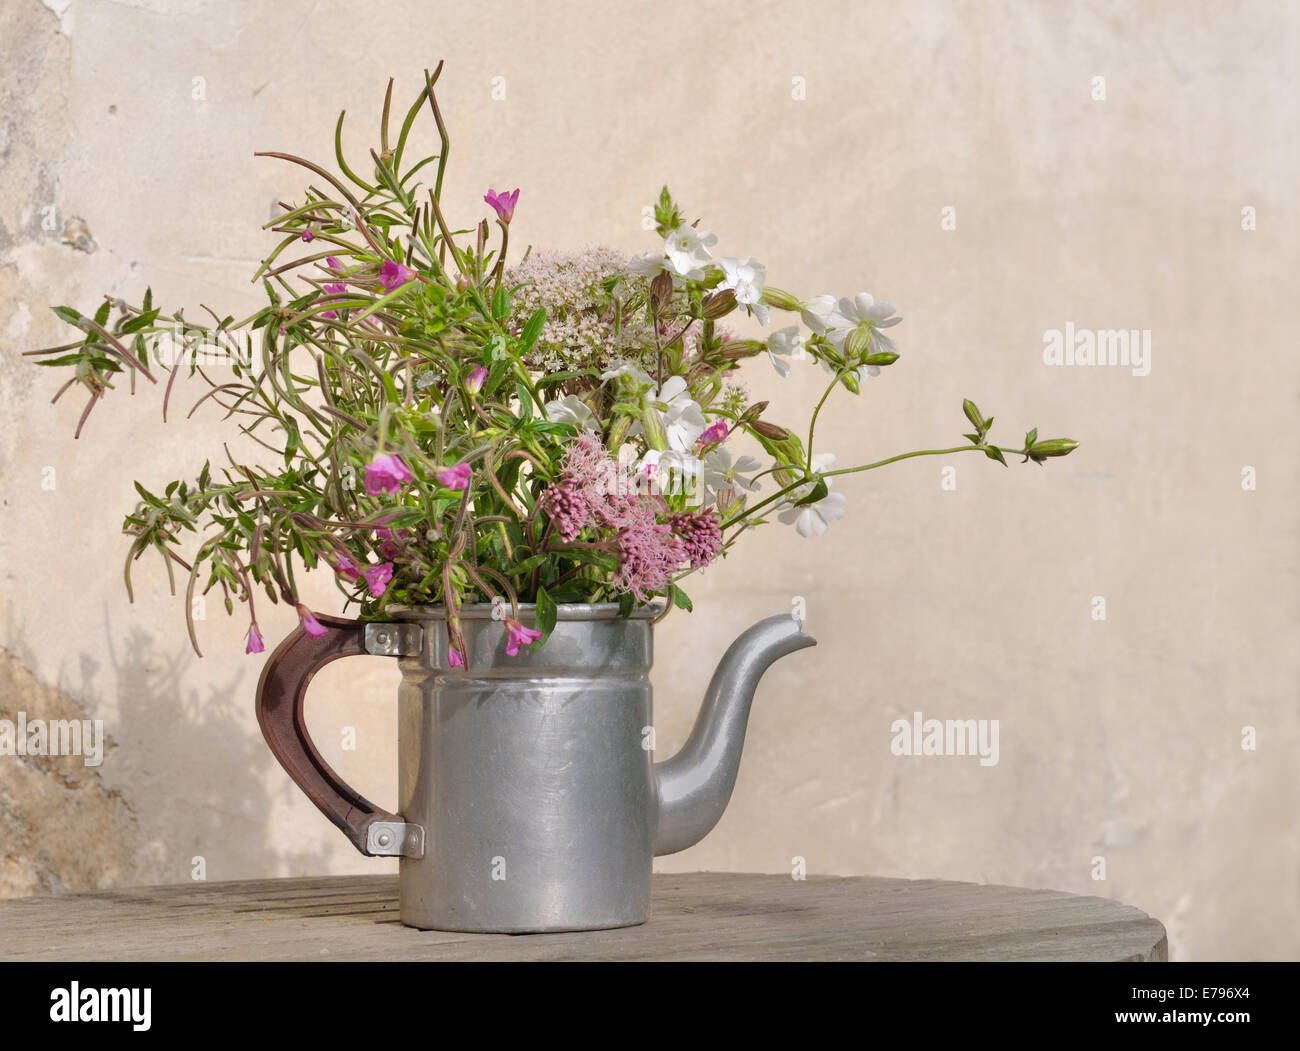 bouquet of wild flowers in old teapot Stock Photo